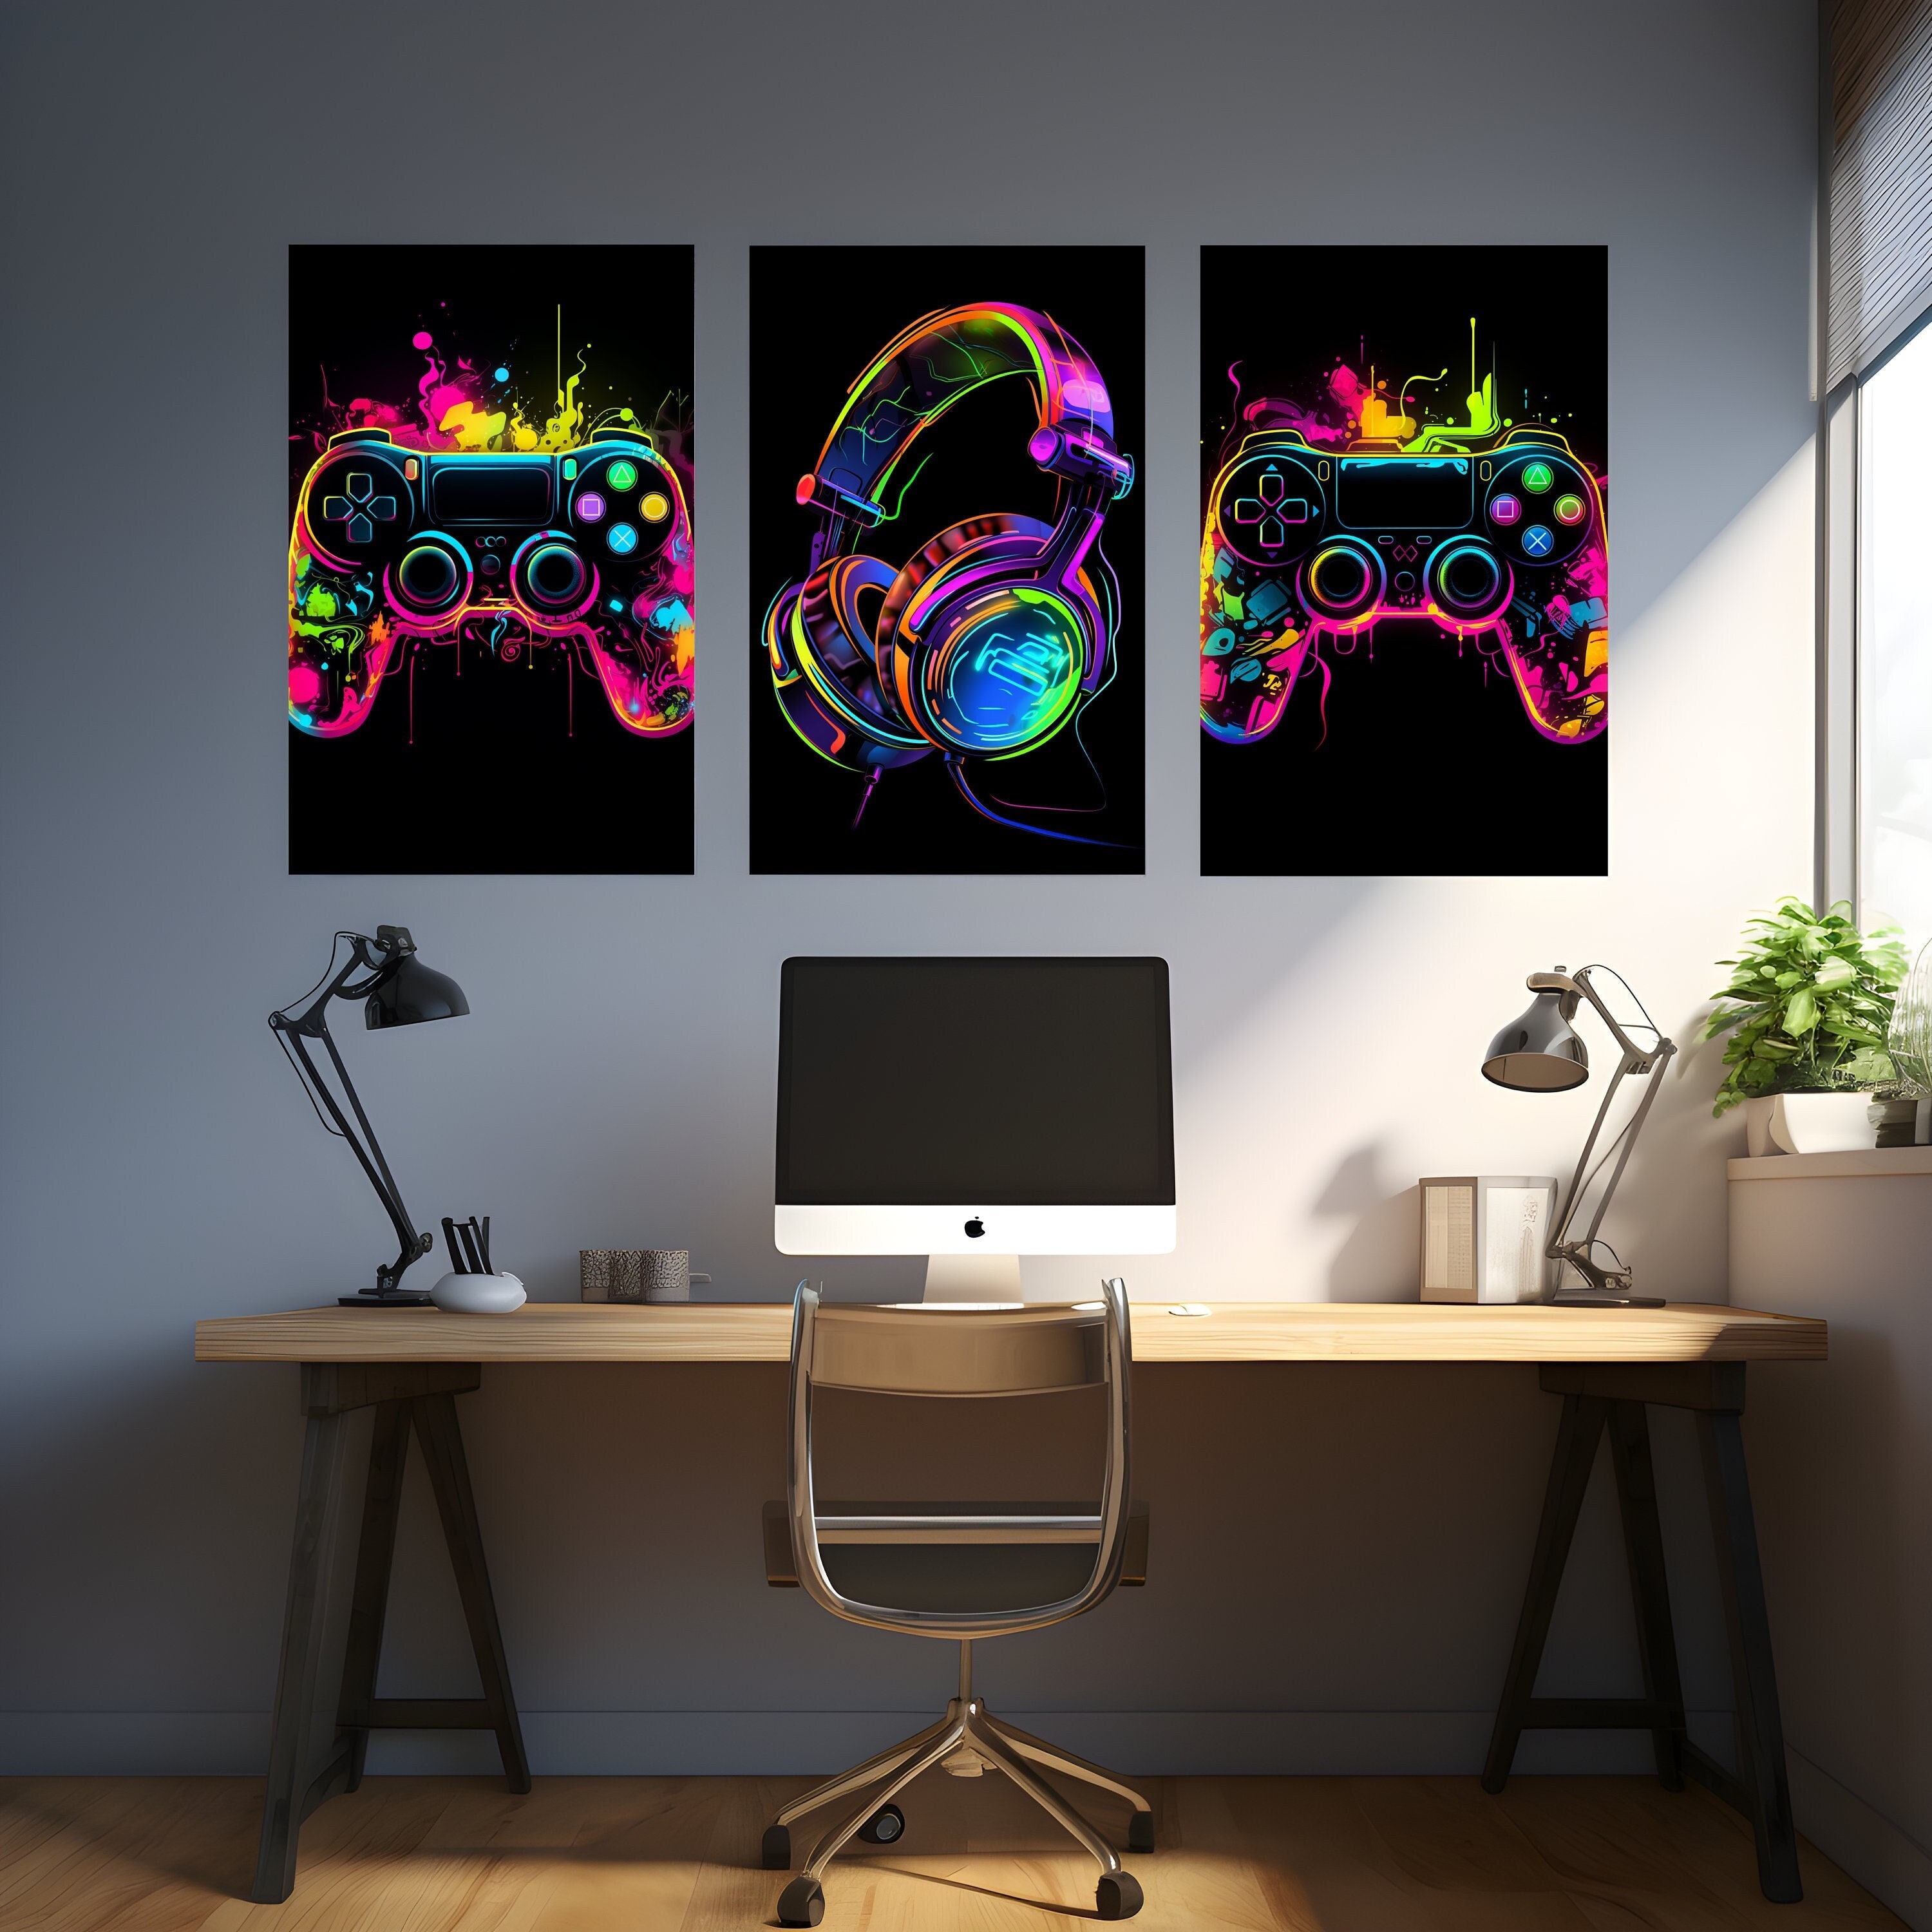 Gamer Room Decor for Boys - Gaming Wall Art - FRAMED 8x10 - PRINTED Neon  Gaming Room Decor - Posters for Boys Room - Video Game Decor - Gaming Wall